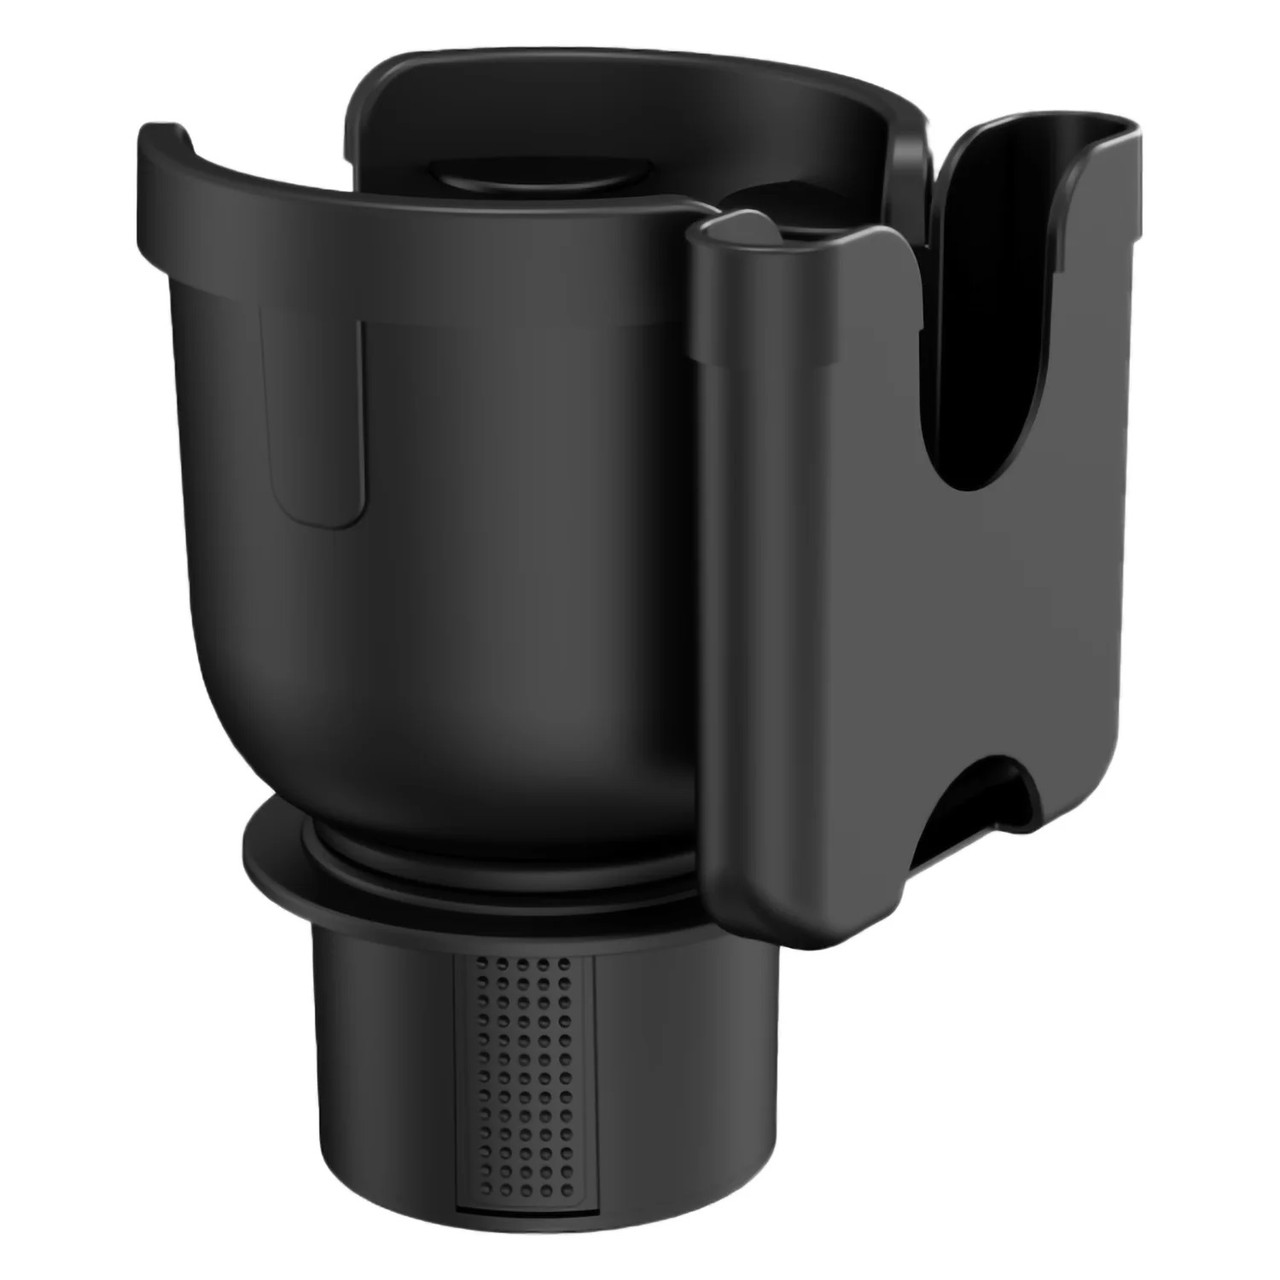 2-IN-1 Cup Holder Expander with Phone Holder - Black - HD Accessory